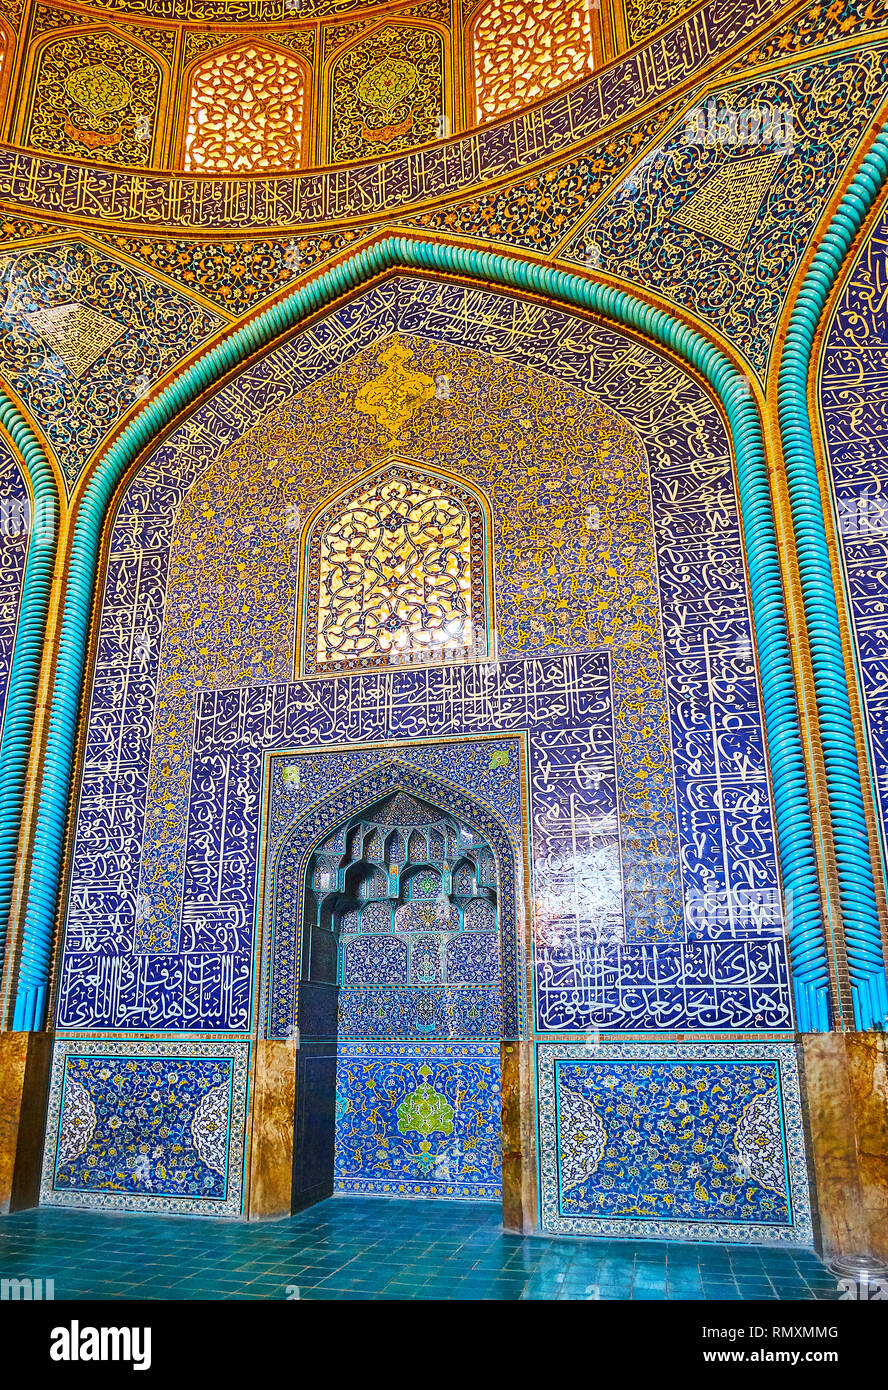 ISFAHAN, IRAN - OCTOBER 21, 2017: The scenic mihrab of royal Sheikh Lotfollah mosque, the Qibla niche surrounded by ornate tiling and Quranic calligra Stock Photo